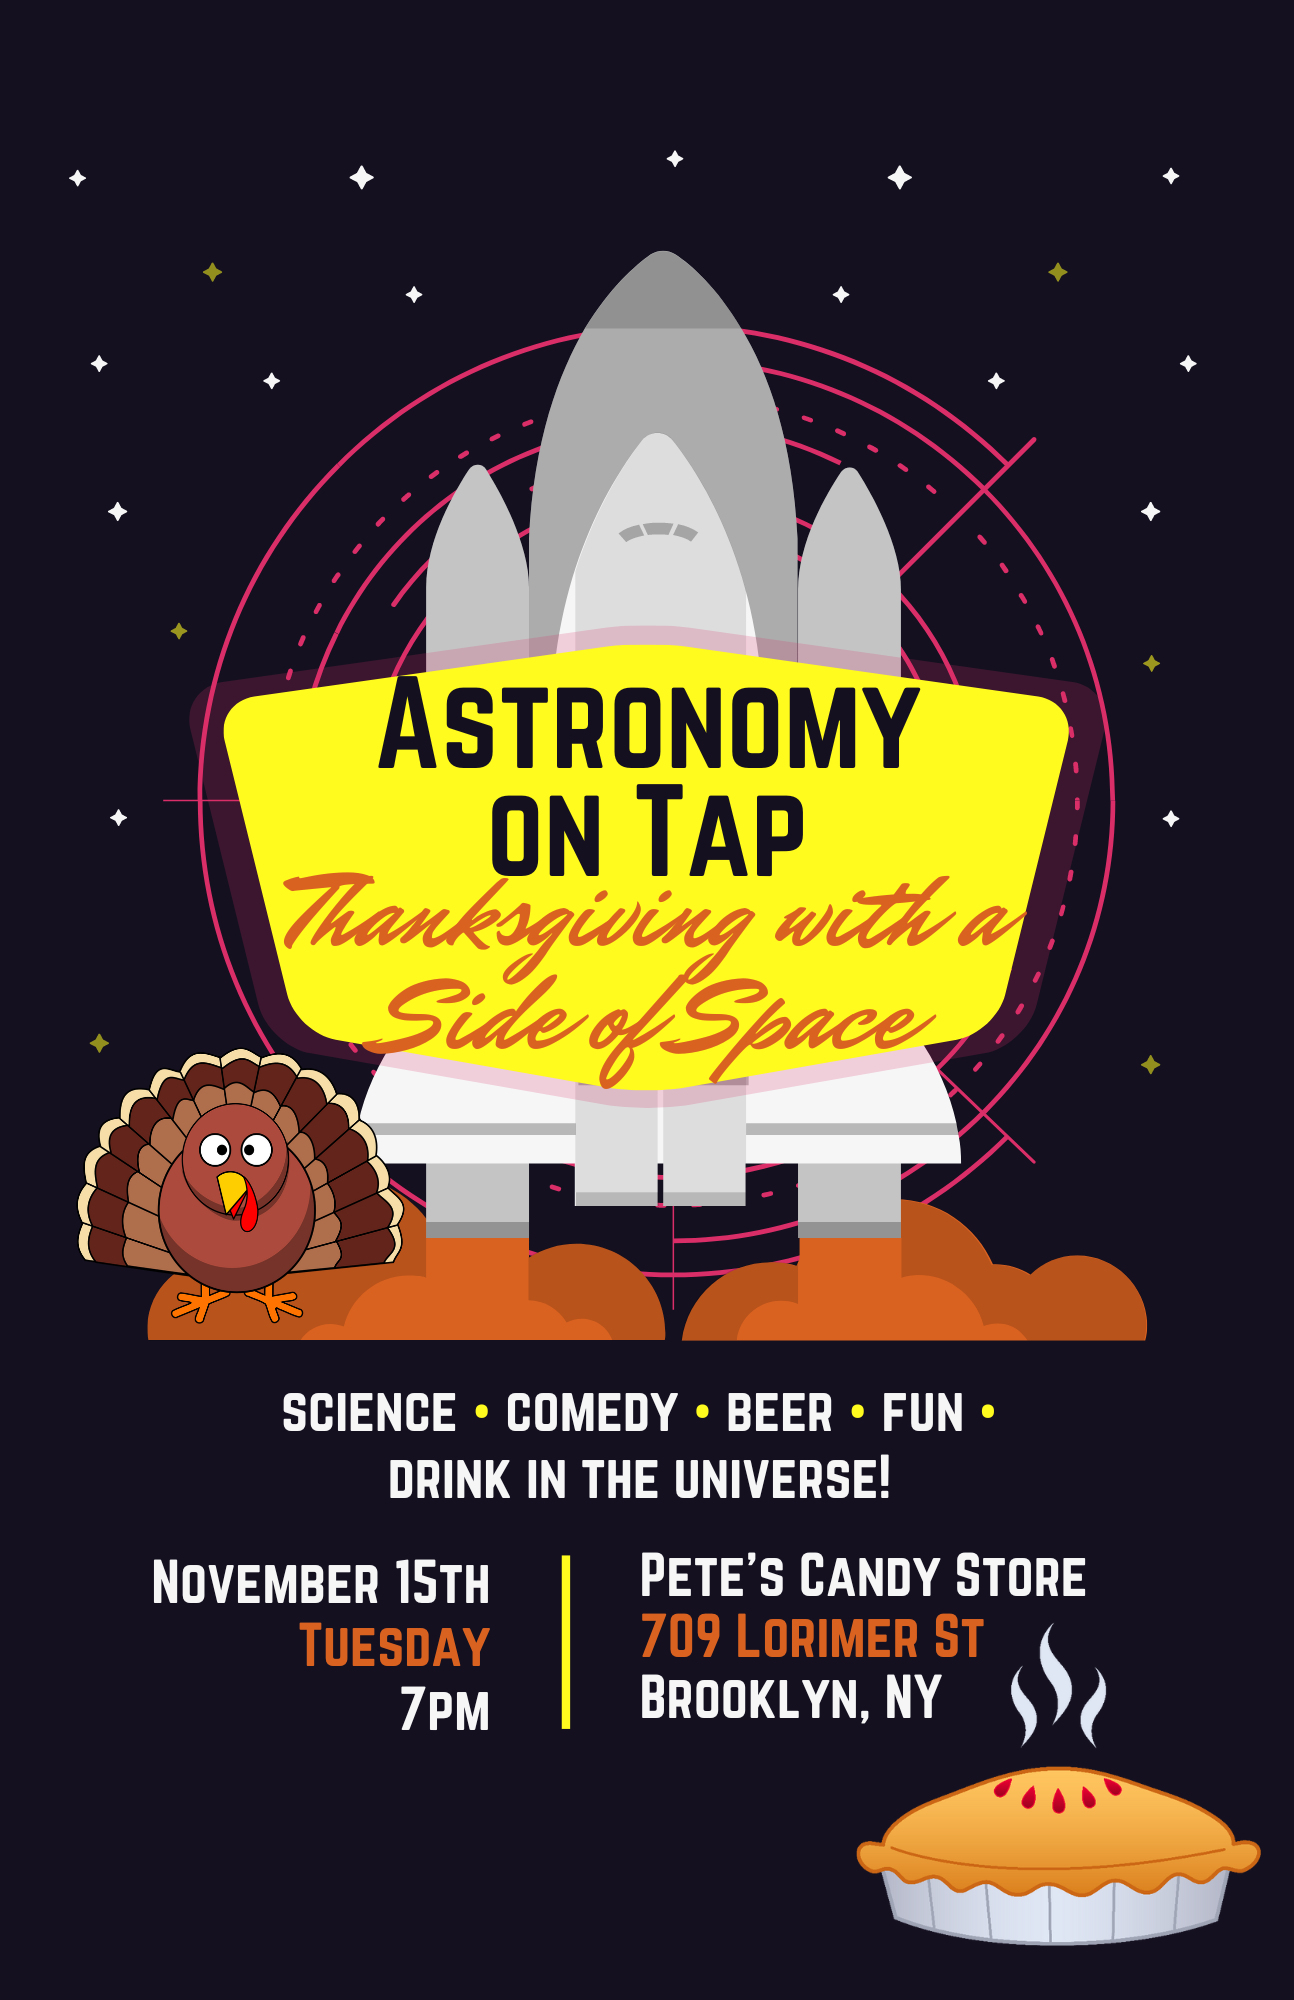 A space shuttle in the background with information about the Astronomy on Tap event.